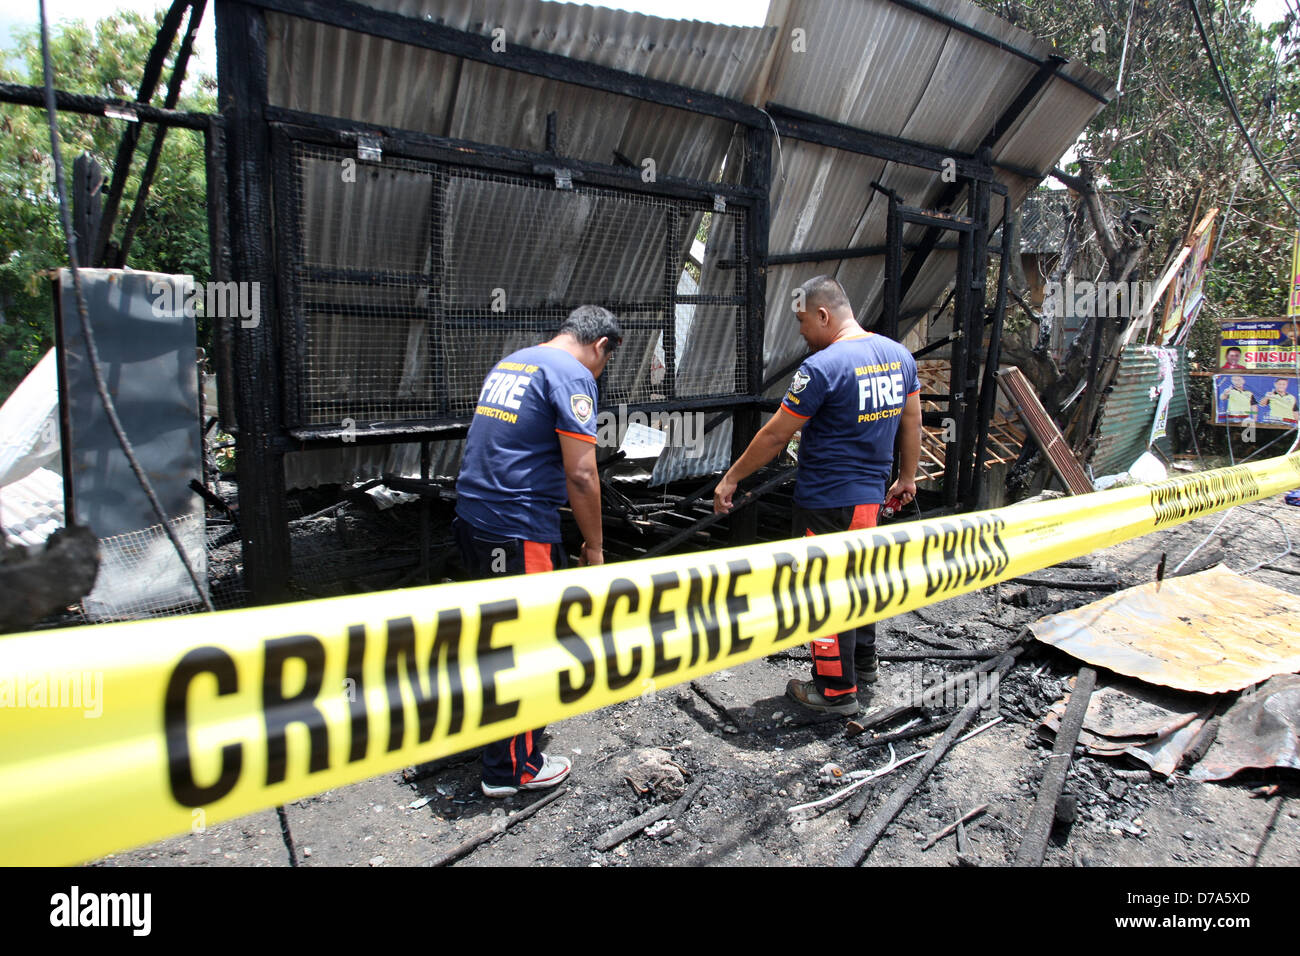 SULTAN KUDARAT, PHILIPPINES, 2nd May, 2013. Filipino fire marshals inspect the razed provincial headquarters of Philippine President Benigno Aquino III’s Liberal Party in the southern Philippine township of Sultan Kudarat town in Maguindanao, May, 2, 2013.  Unidentified men on Wednesday night set afire the building but no casulaty was reported.On May 13, 2013, the Philippines will hold congressional and local elections. Previous elections in the country have been marred by violence, especially in rural areas awash in weapons and private militias. In 2009, 58 people, including 32 media workers, Stock Photo